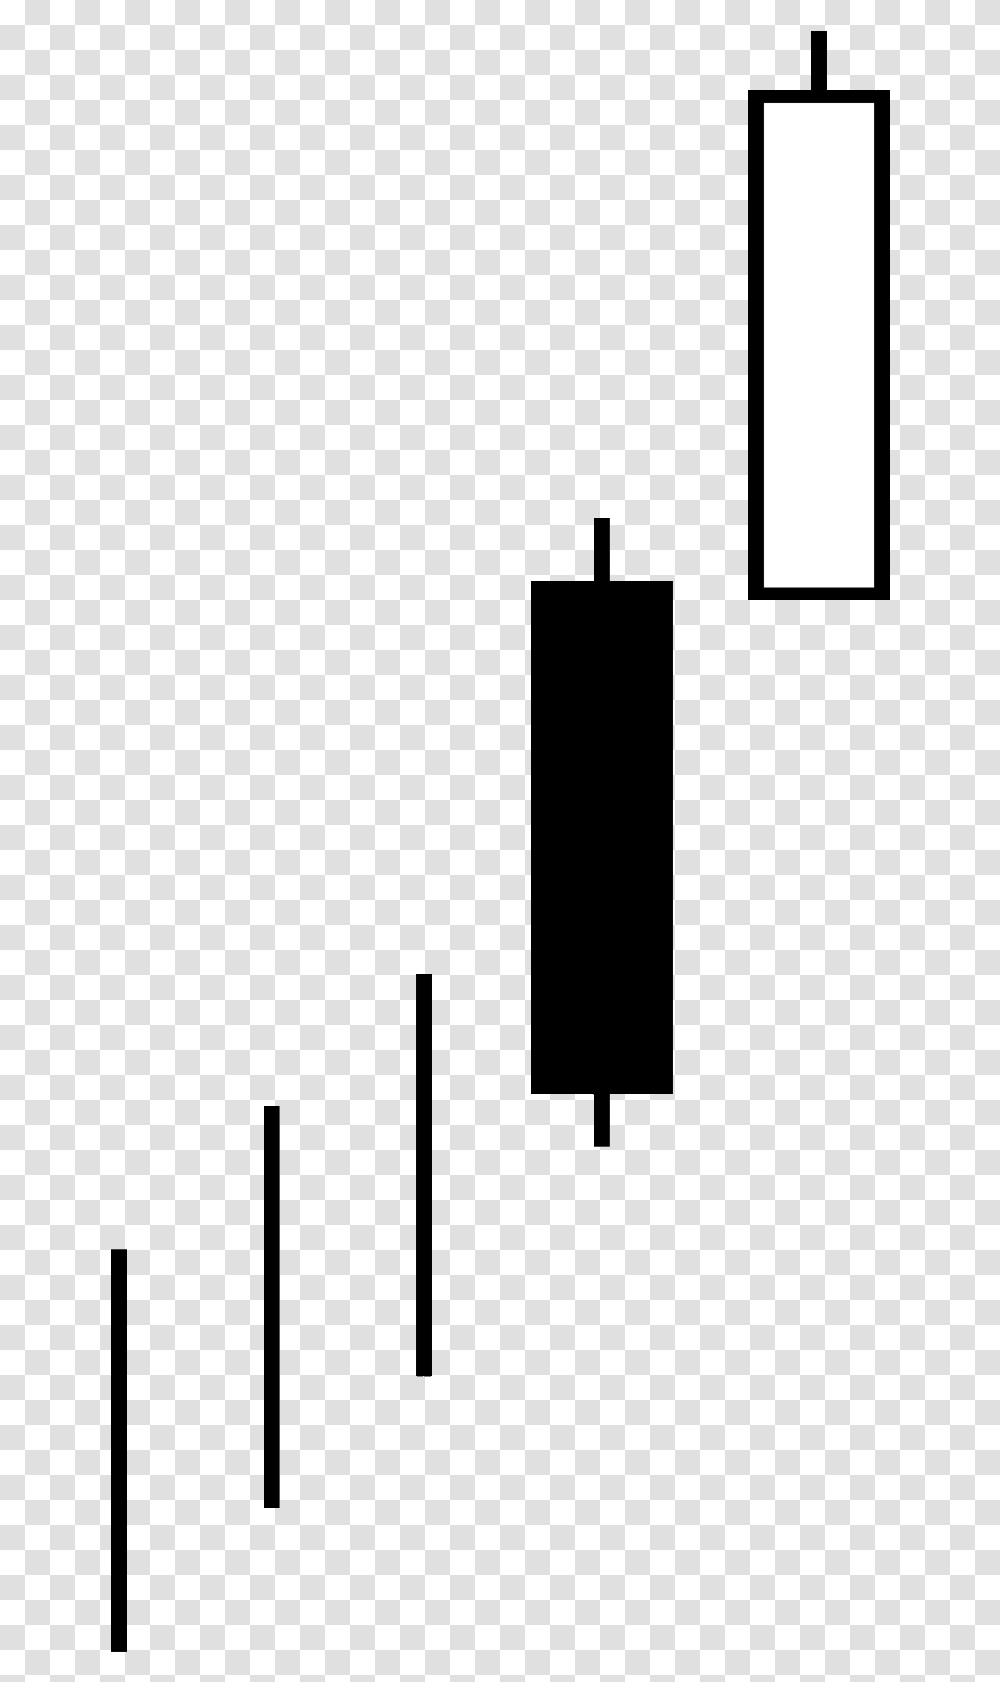 Candlestick Pattern Bullish Separating Lines Black And White, People, Outdoors Transparent Png